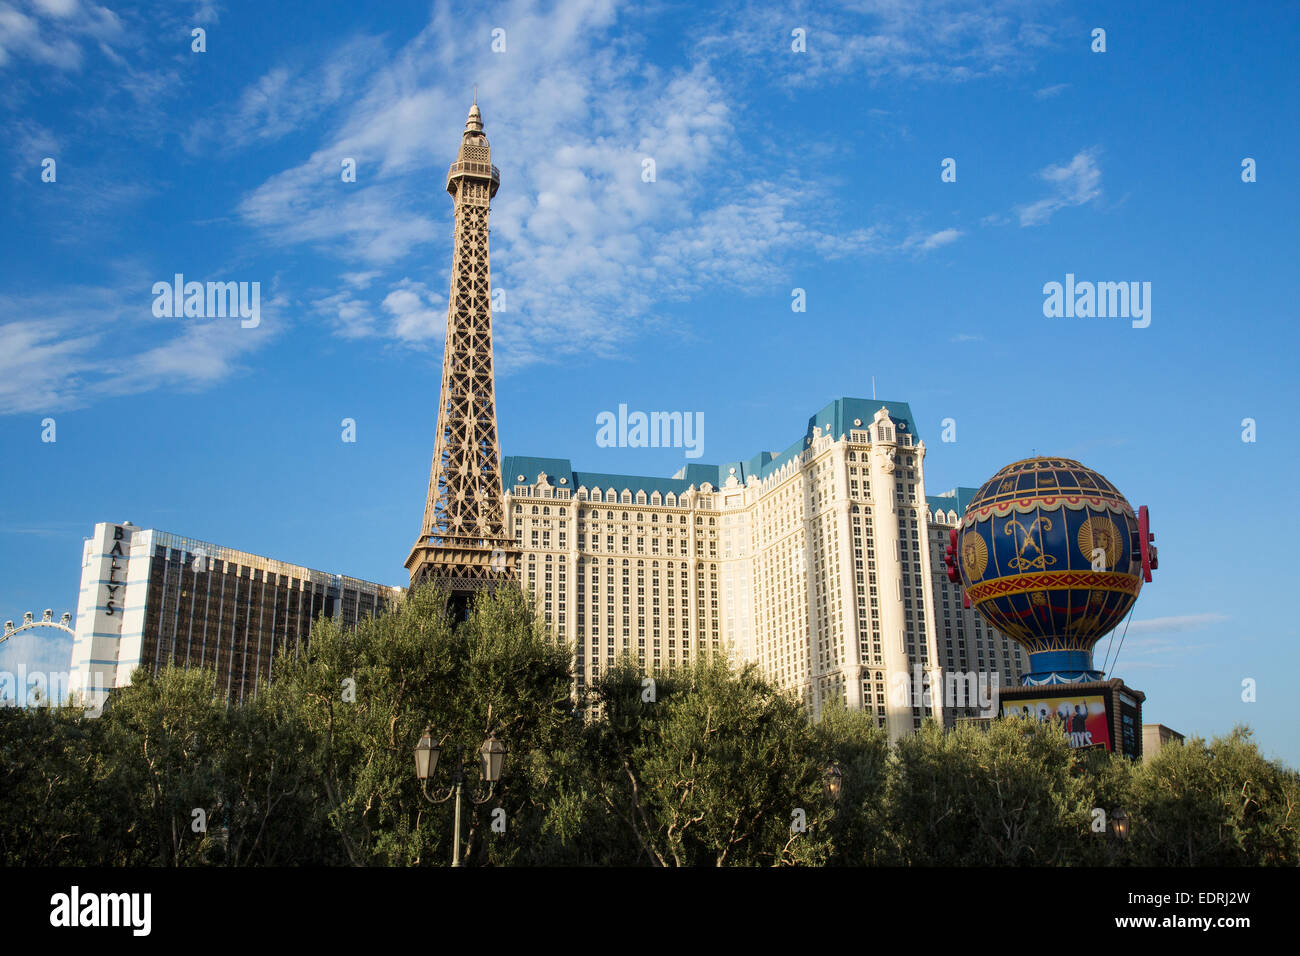 The Eiffel Tower Restaurant at the Paris hotel and casino Bellagio Fountains located on the Las Vegas Strip in Paradise, Nevada. Stock Photo